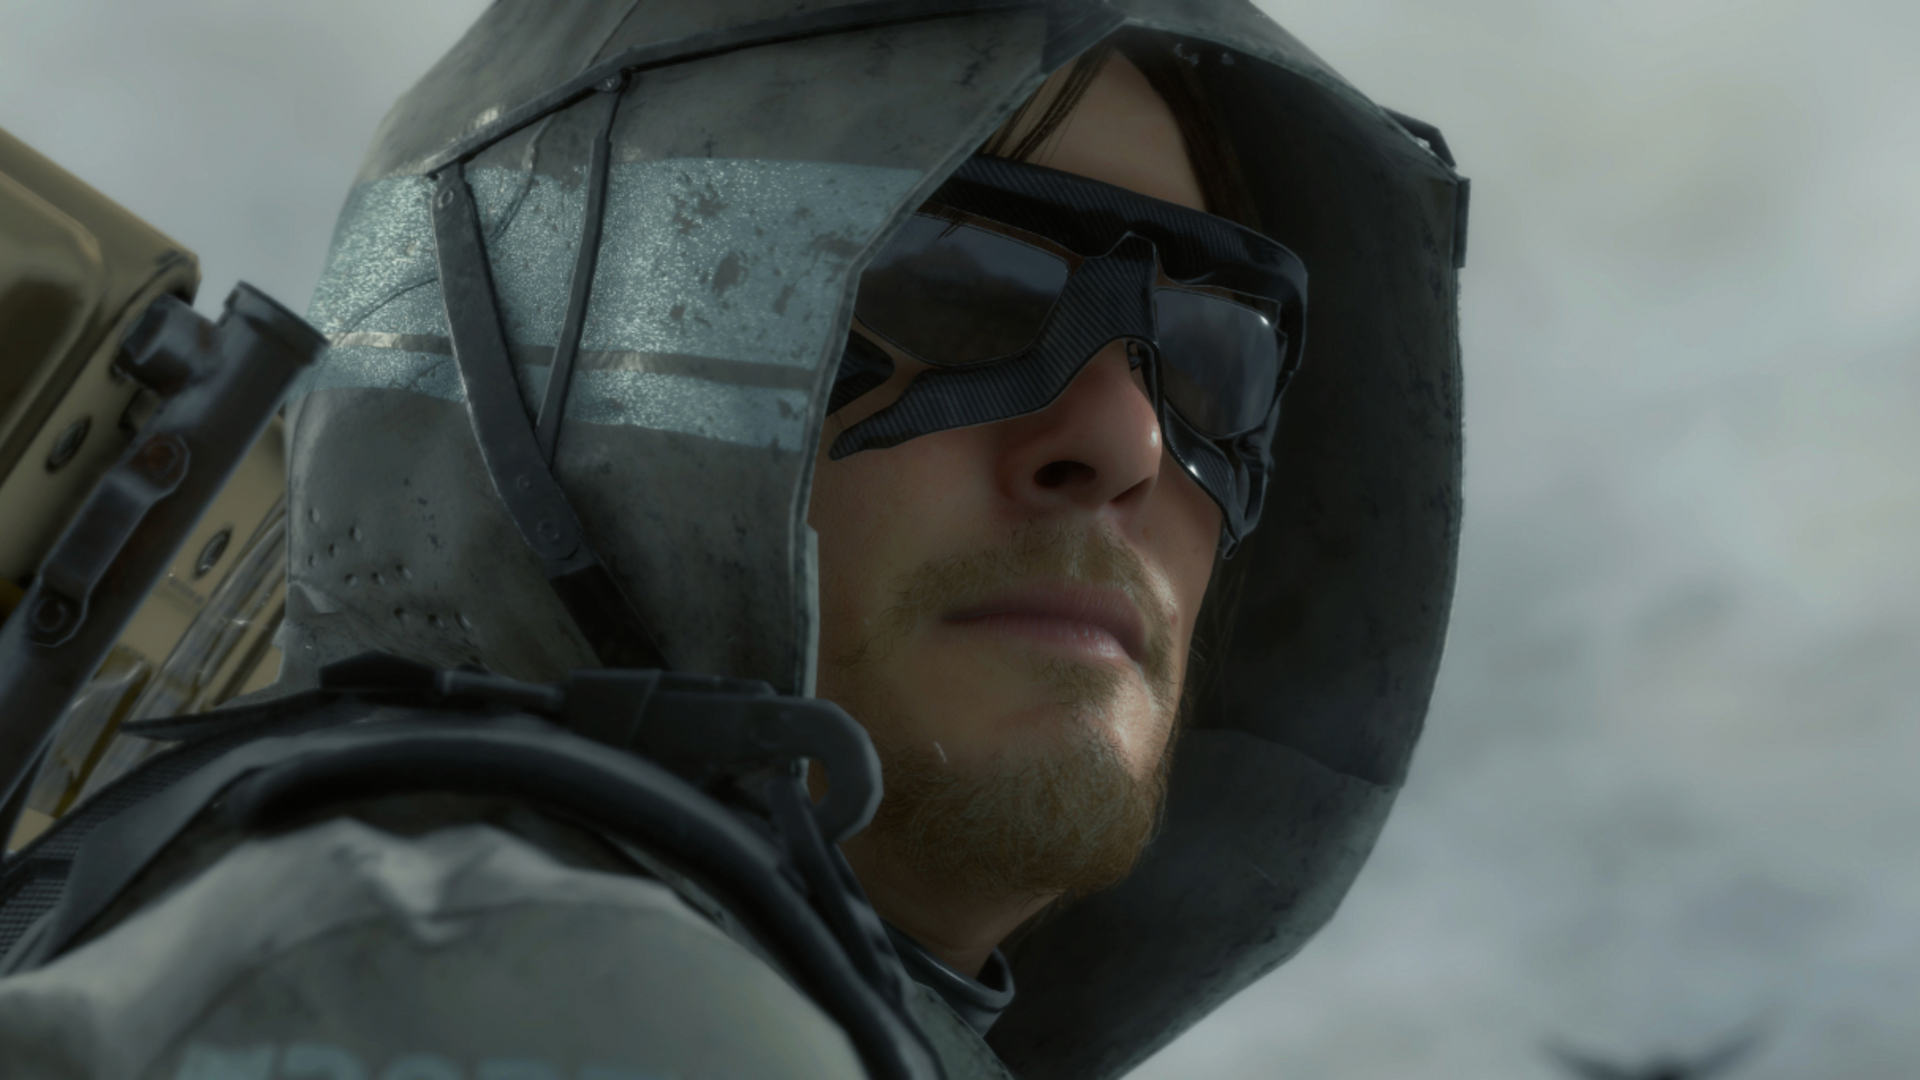 Death Stranding is a free game on Epic, grab it while it lasts